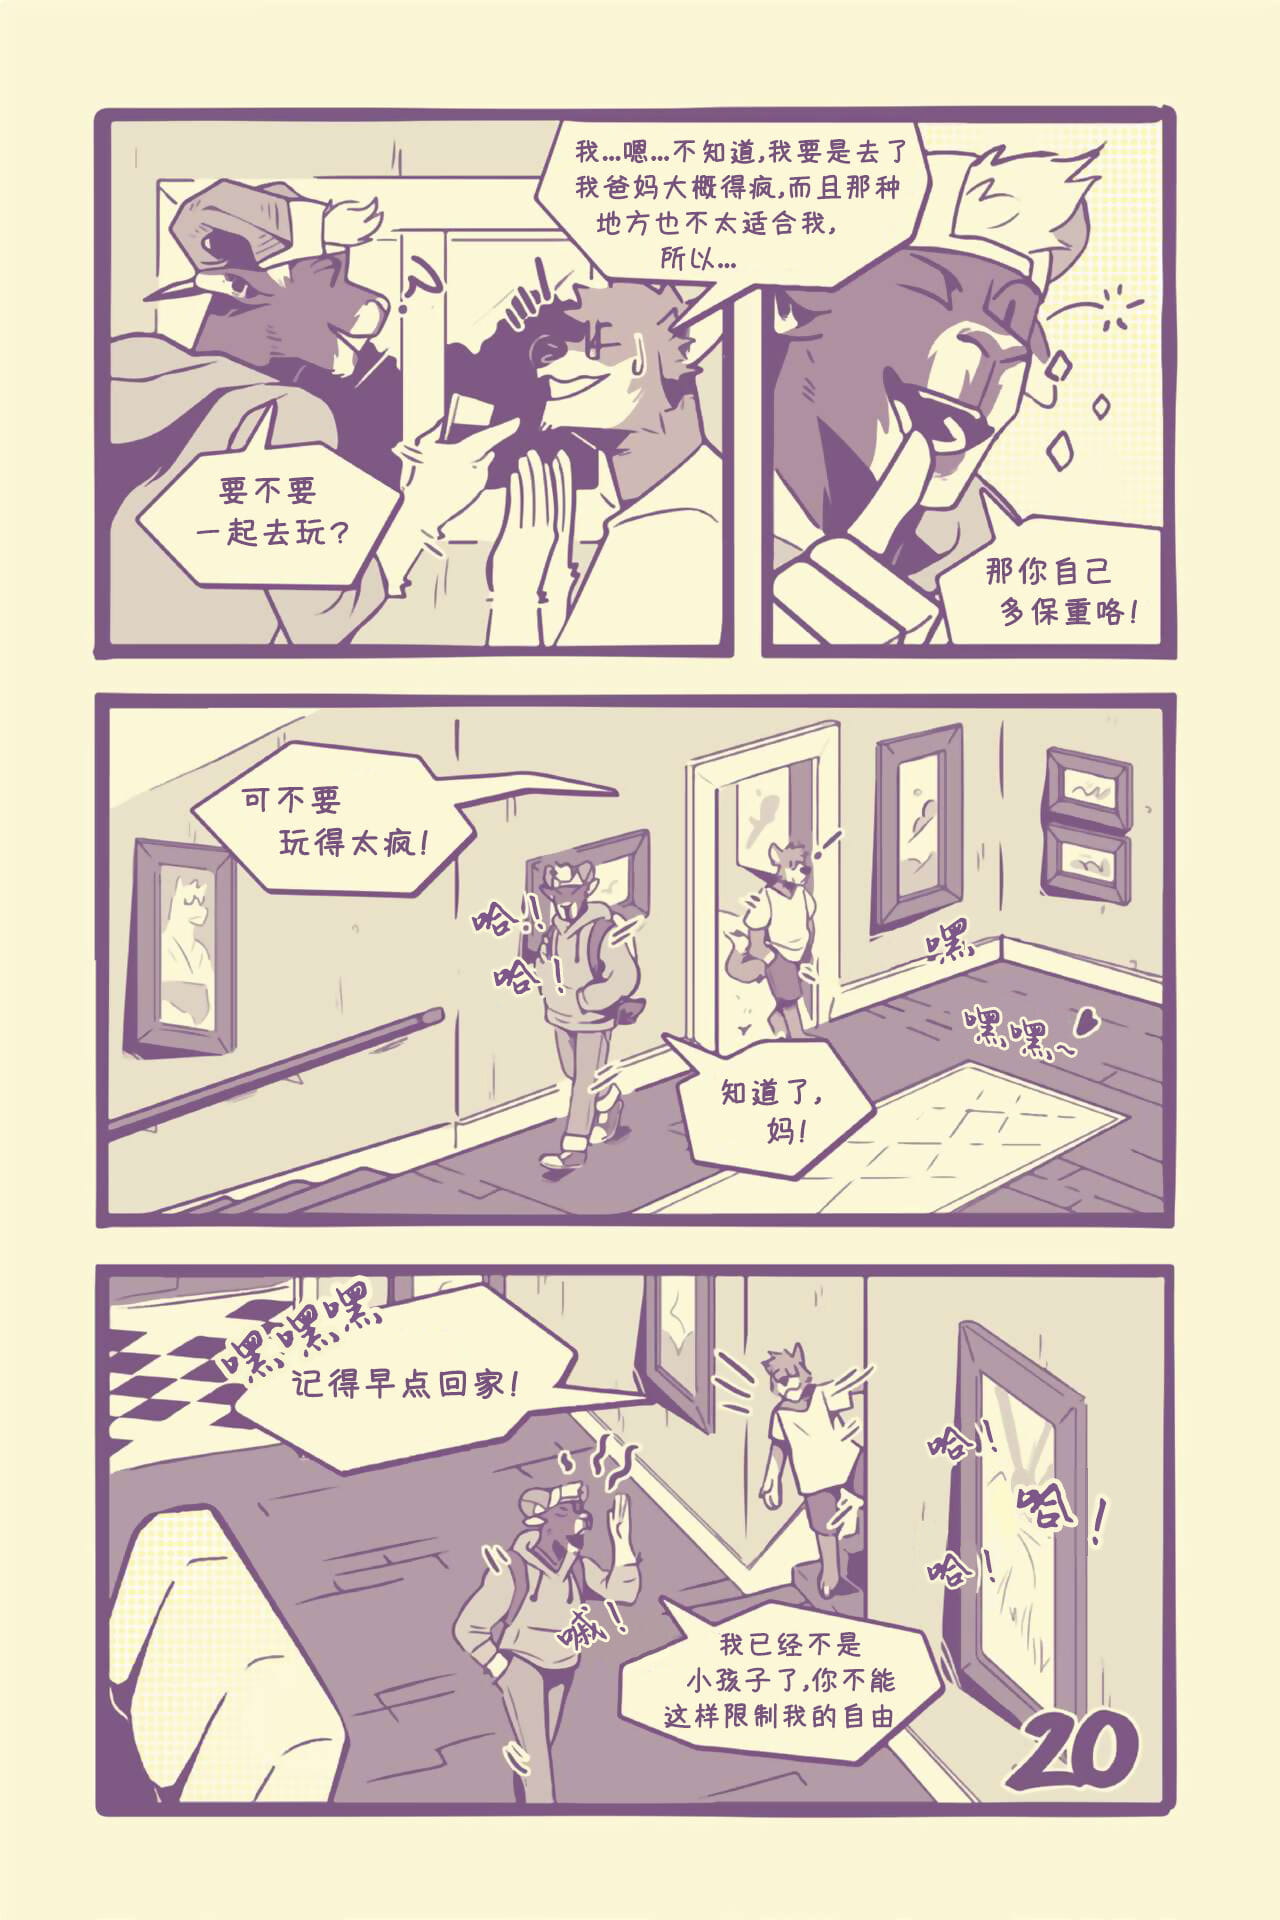 caricatures: 章 1 page 1